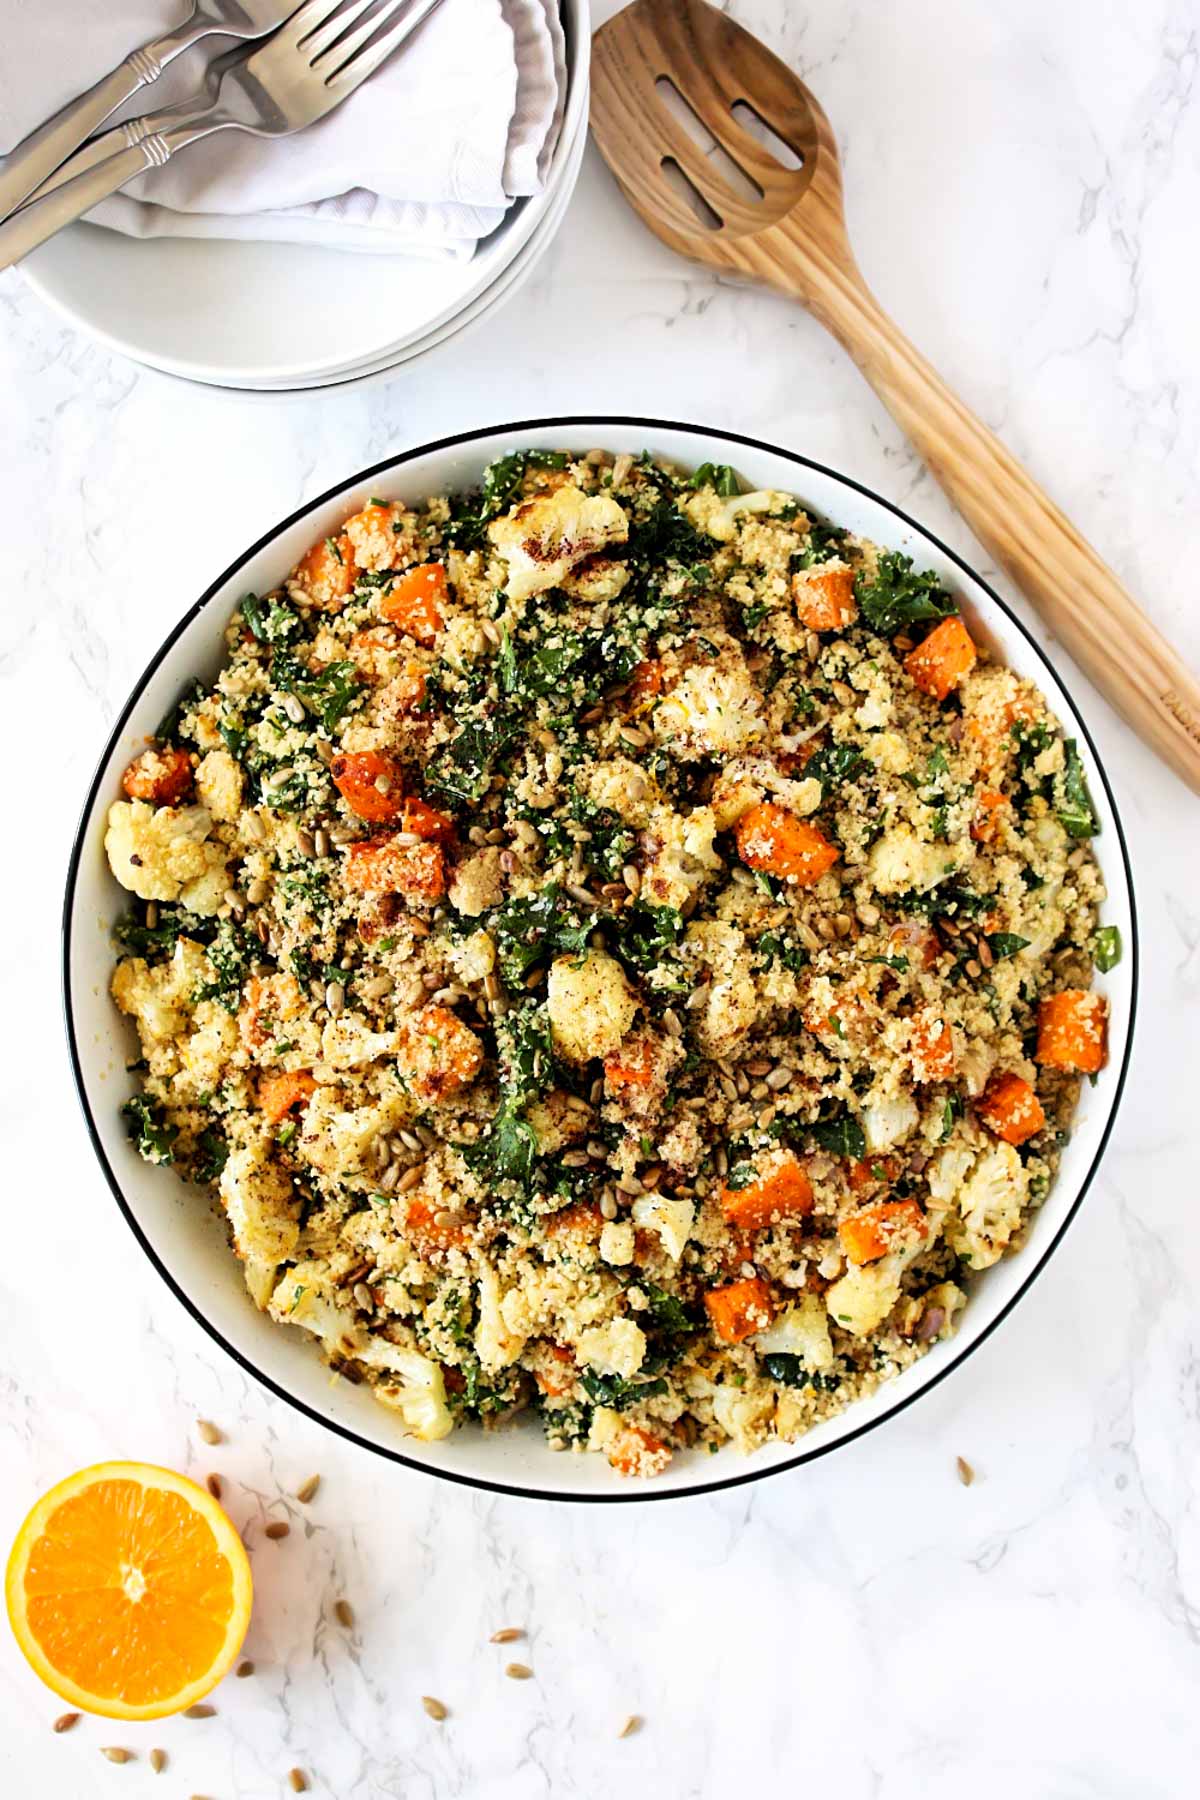 Roasted Vegetable Couscous Salad